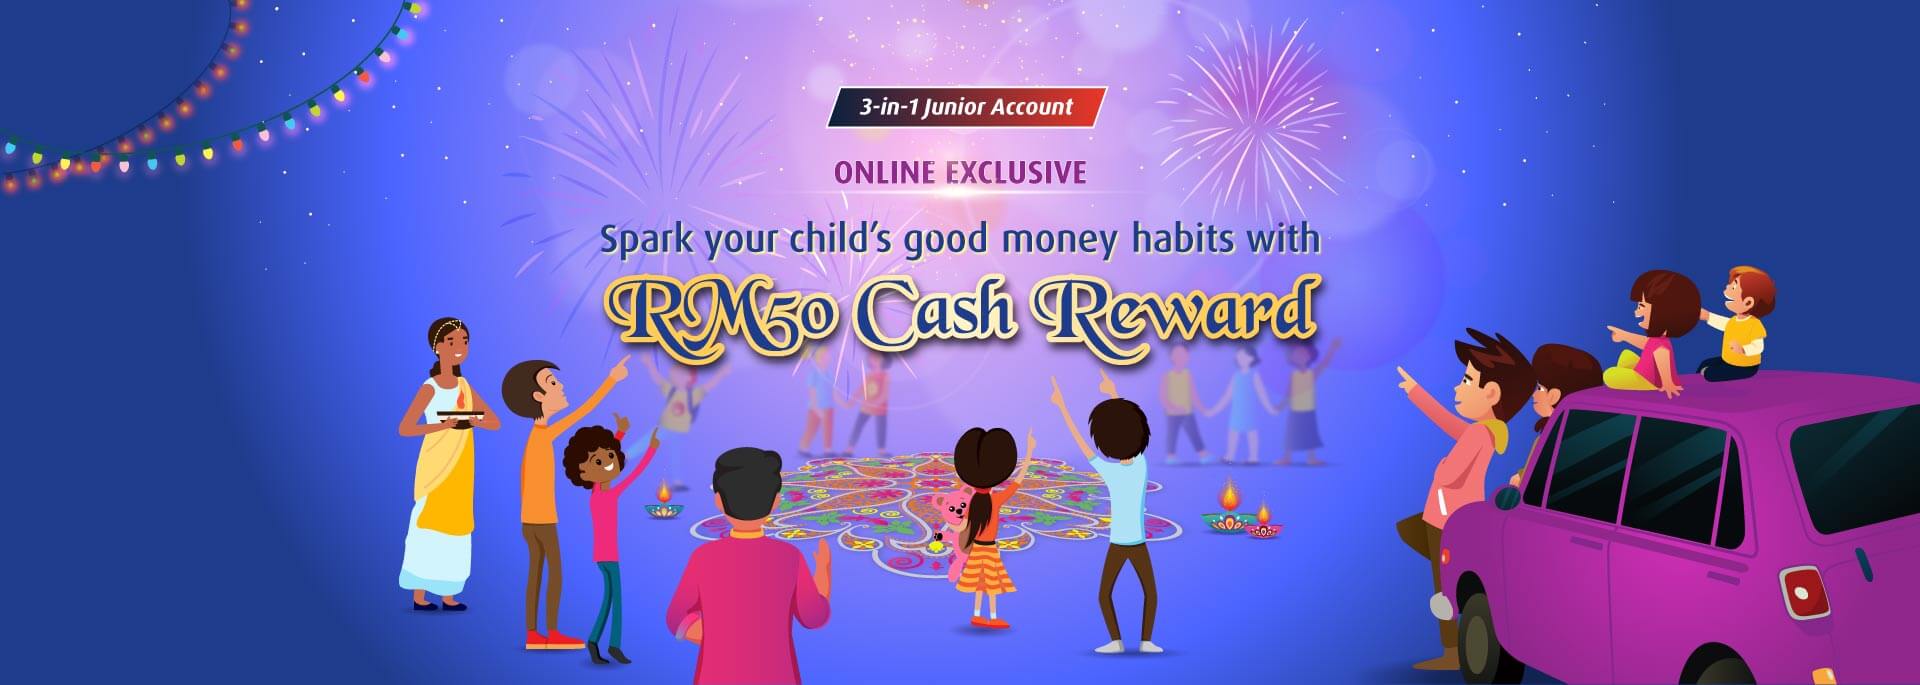 Open a 3-in-1 Junior Account/-i and earn up to RM50 cash reward for your child